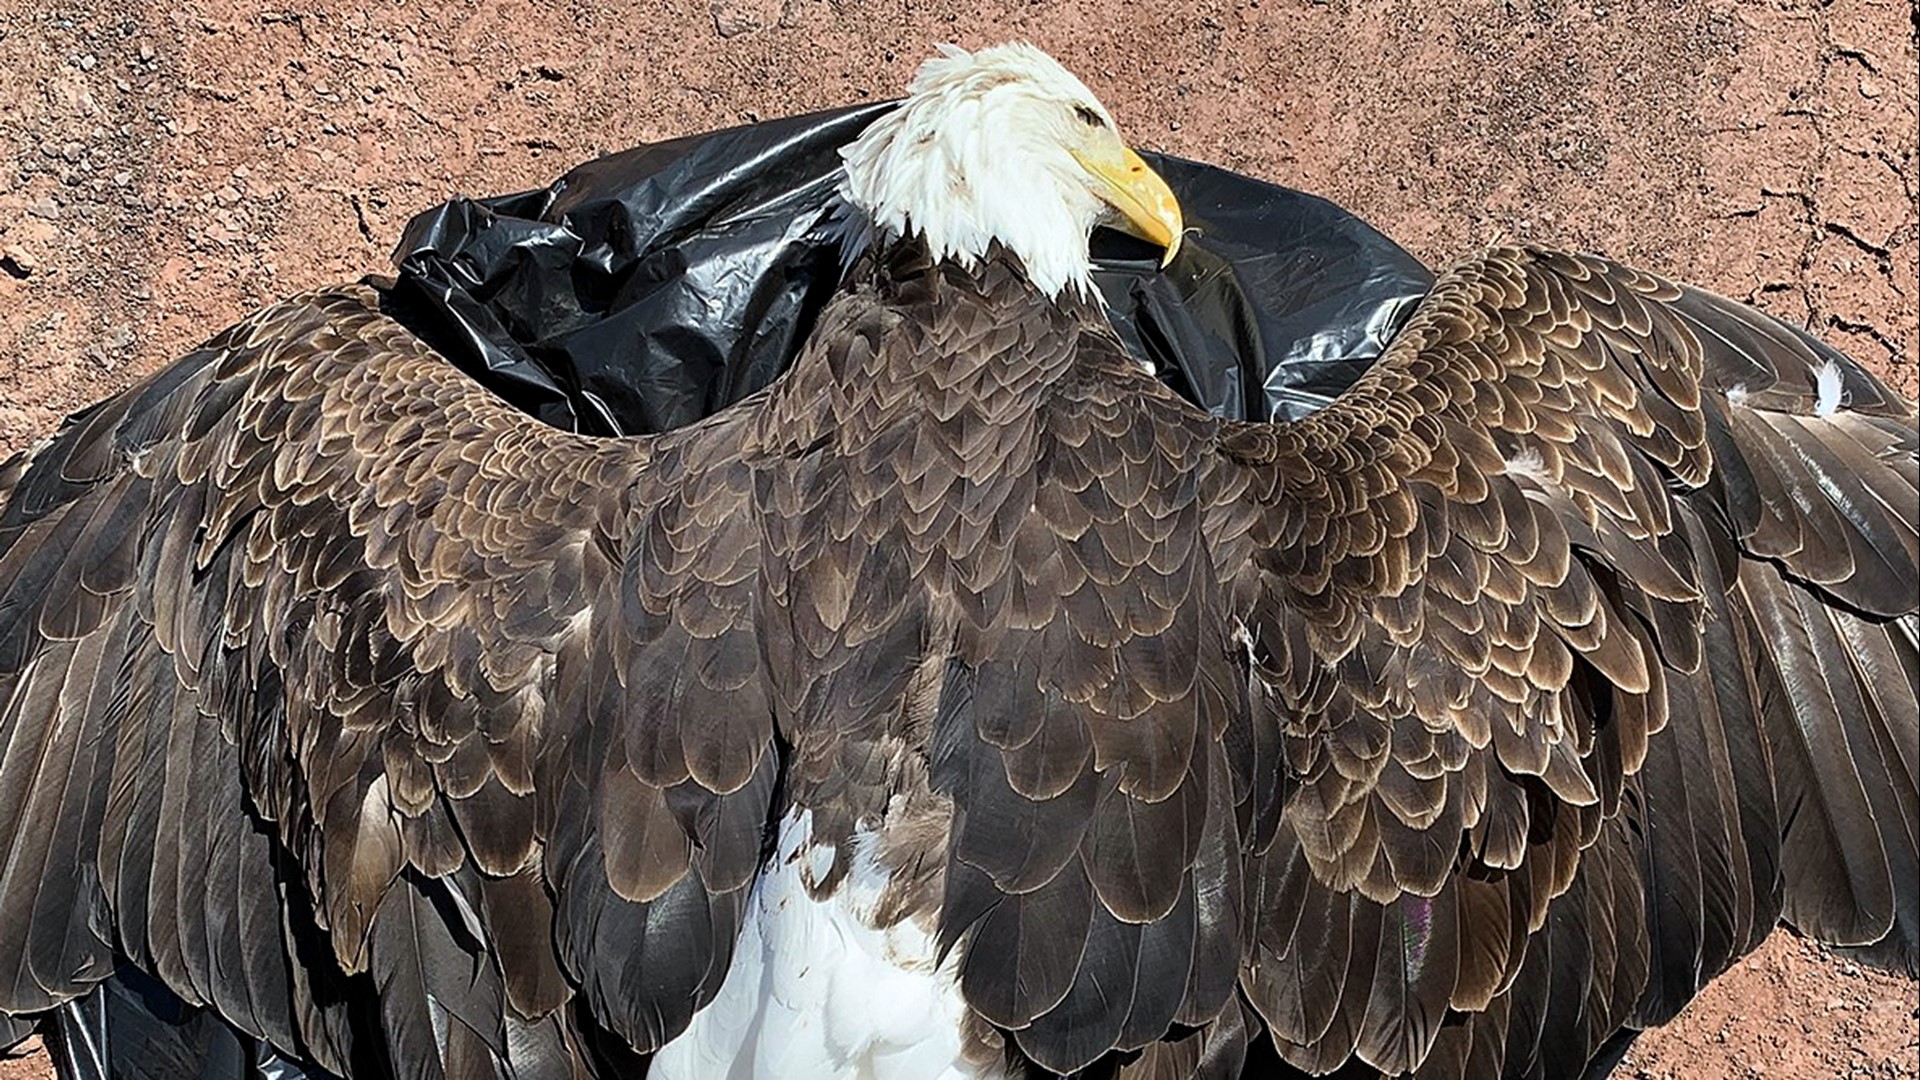 Game Commission investigating bald eagle deaths in Wayne County | wnep.com